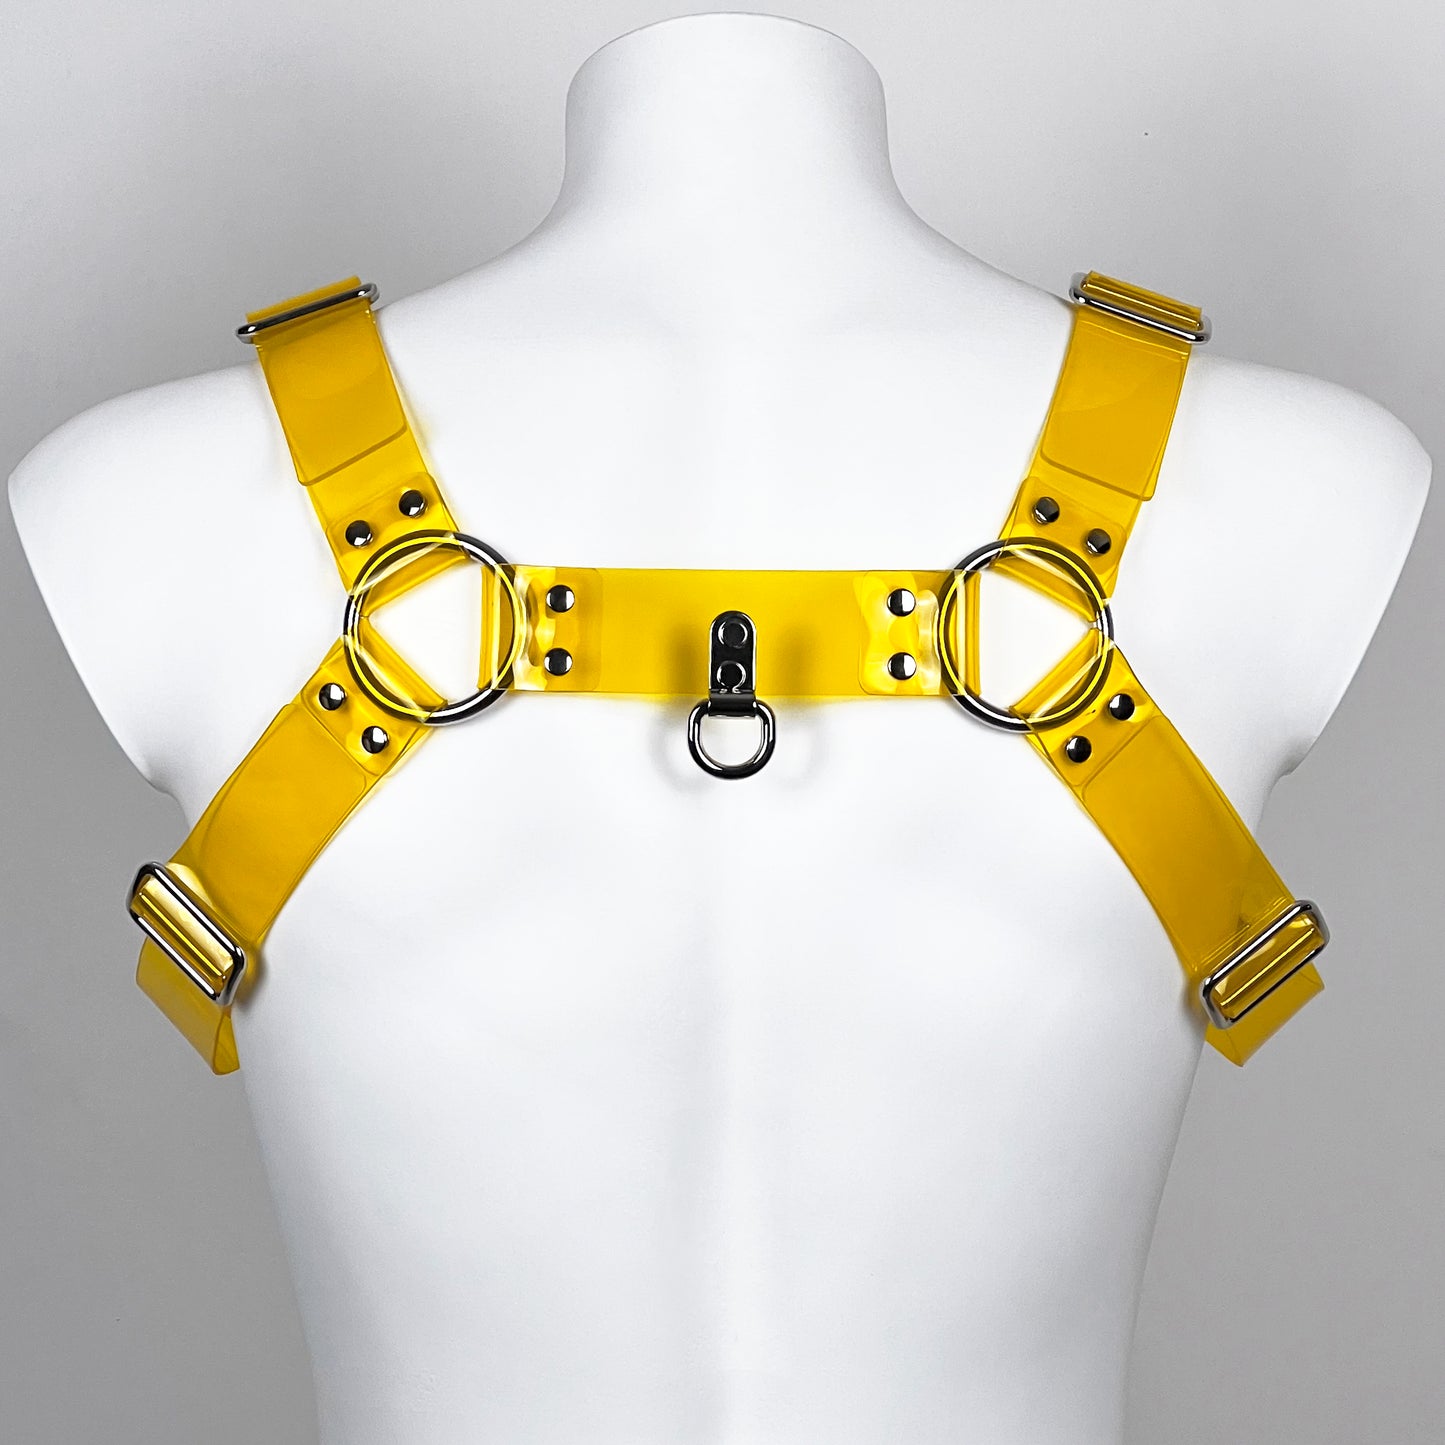 BDSM harness in yellow transparent PVC with metallic buckles